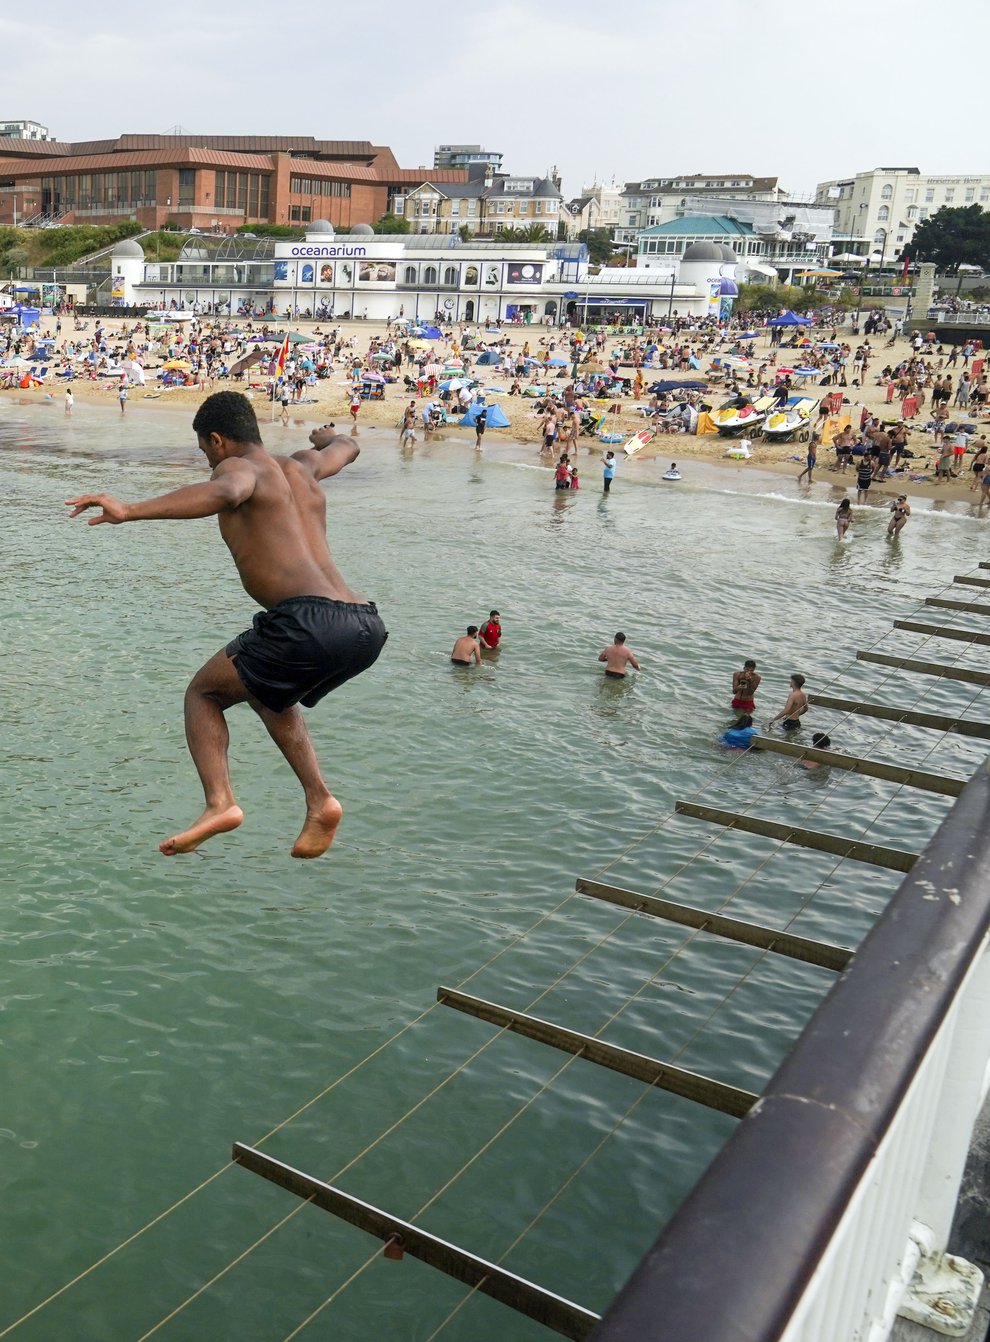 A man jumps from the pier in Bournemouth (PA)